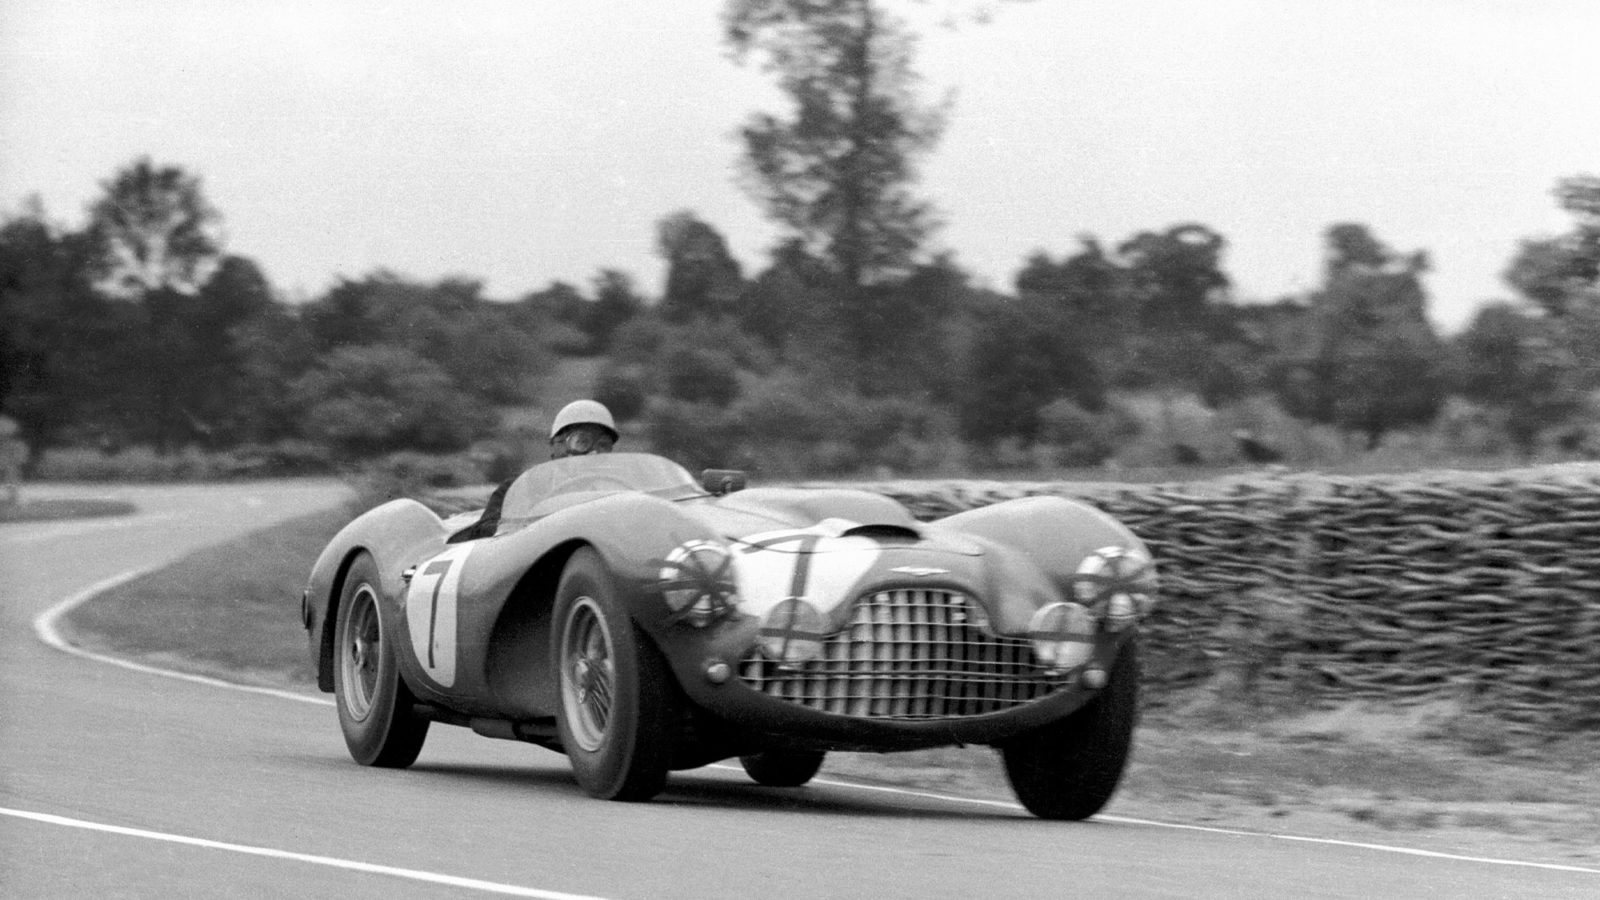 Aston Martin of Eric Thompson and Dennis Poore at Le Mans in 1954